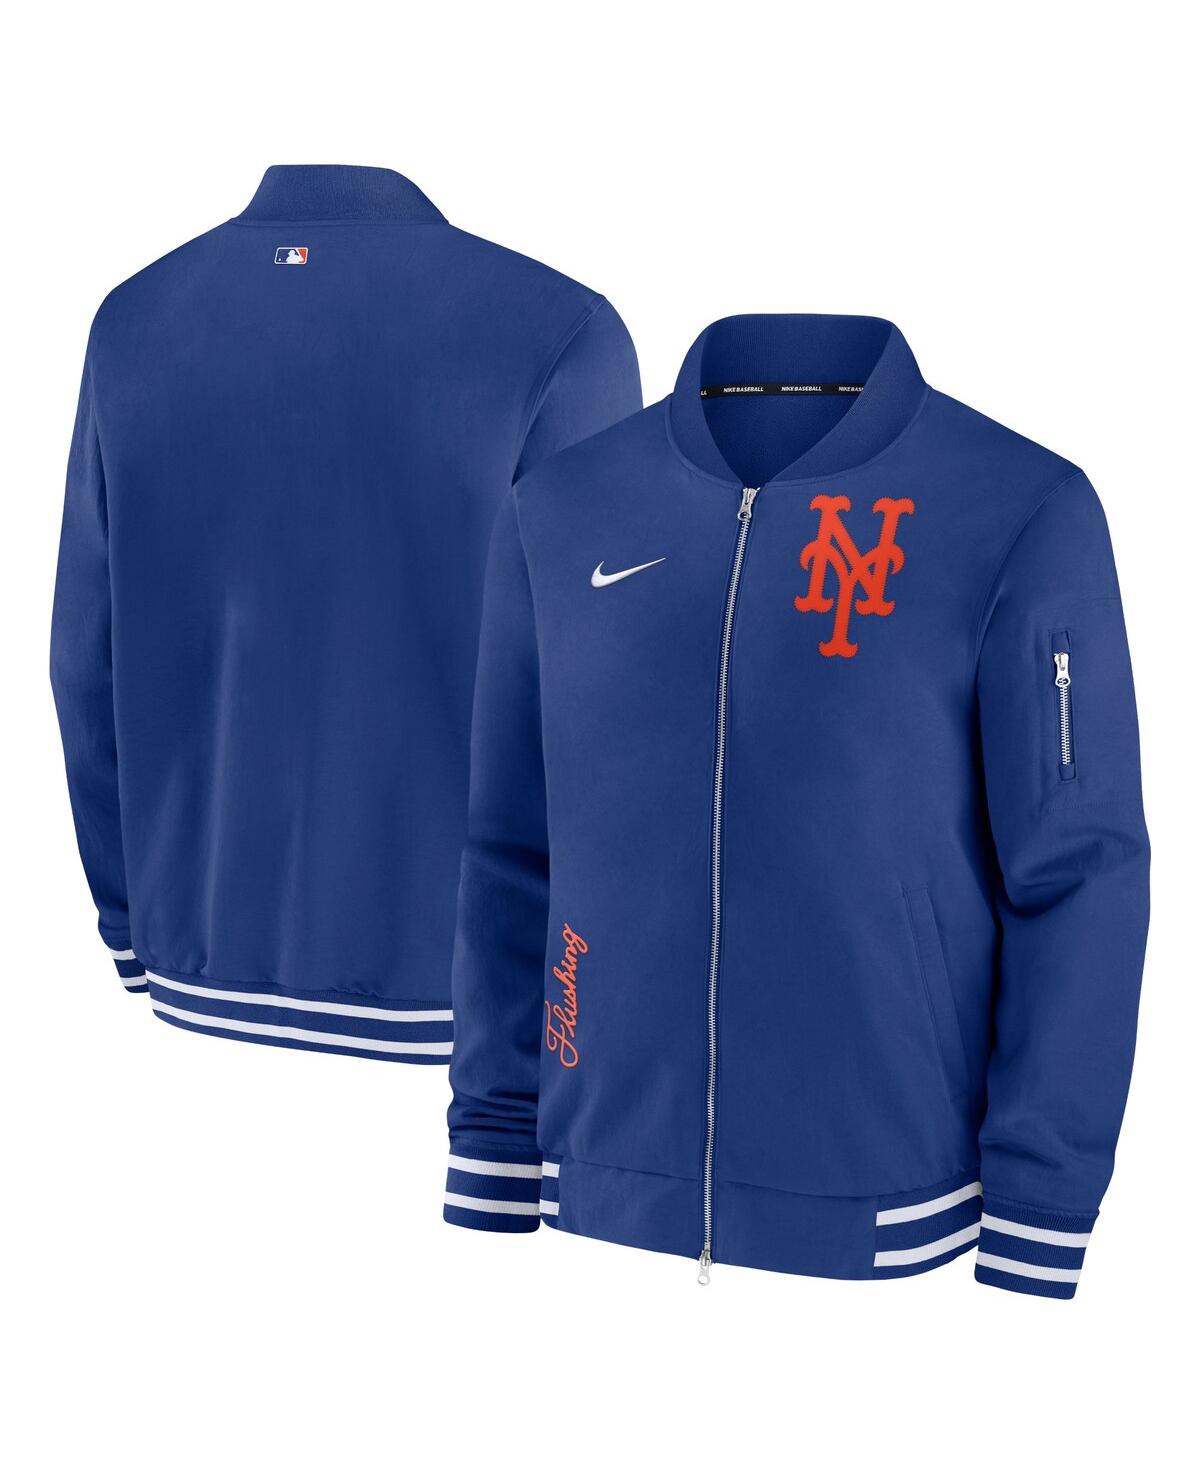 Men's Nike Royal New York Mets Authentic Collection Full-Zip Bomber Jacket - Royal